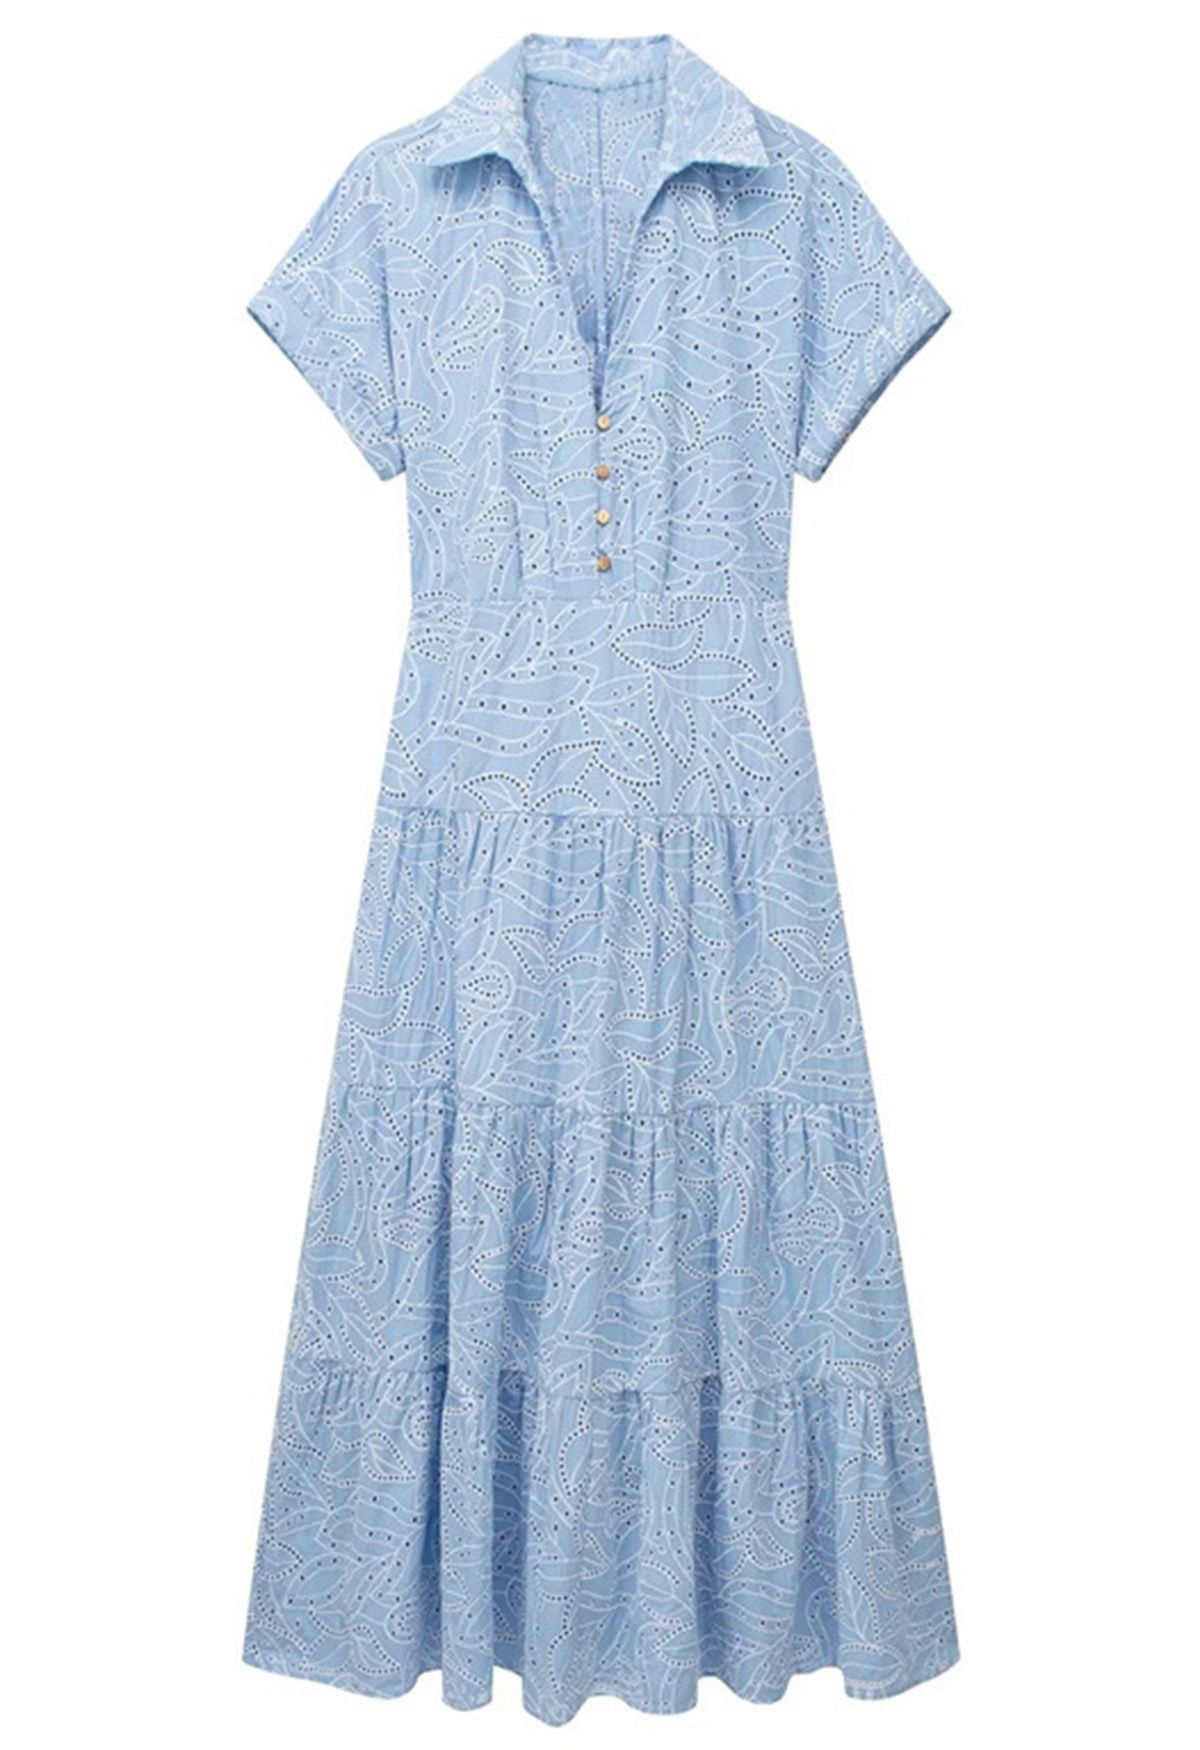 Cutout Back Embroidered Eyelet Shirt Dress - Retro, Indie and Unique ...